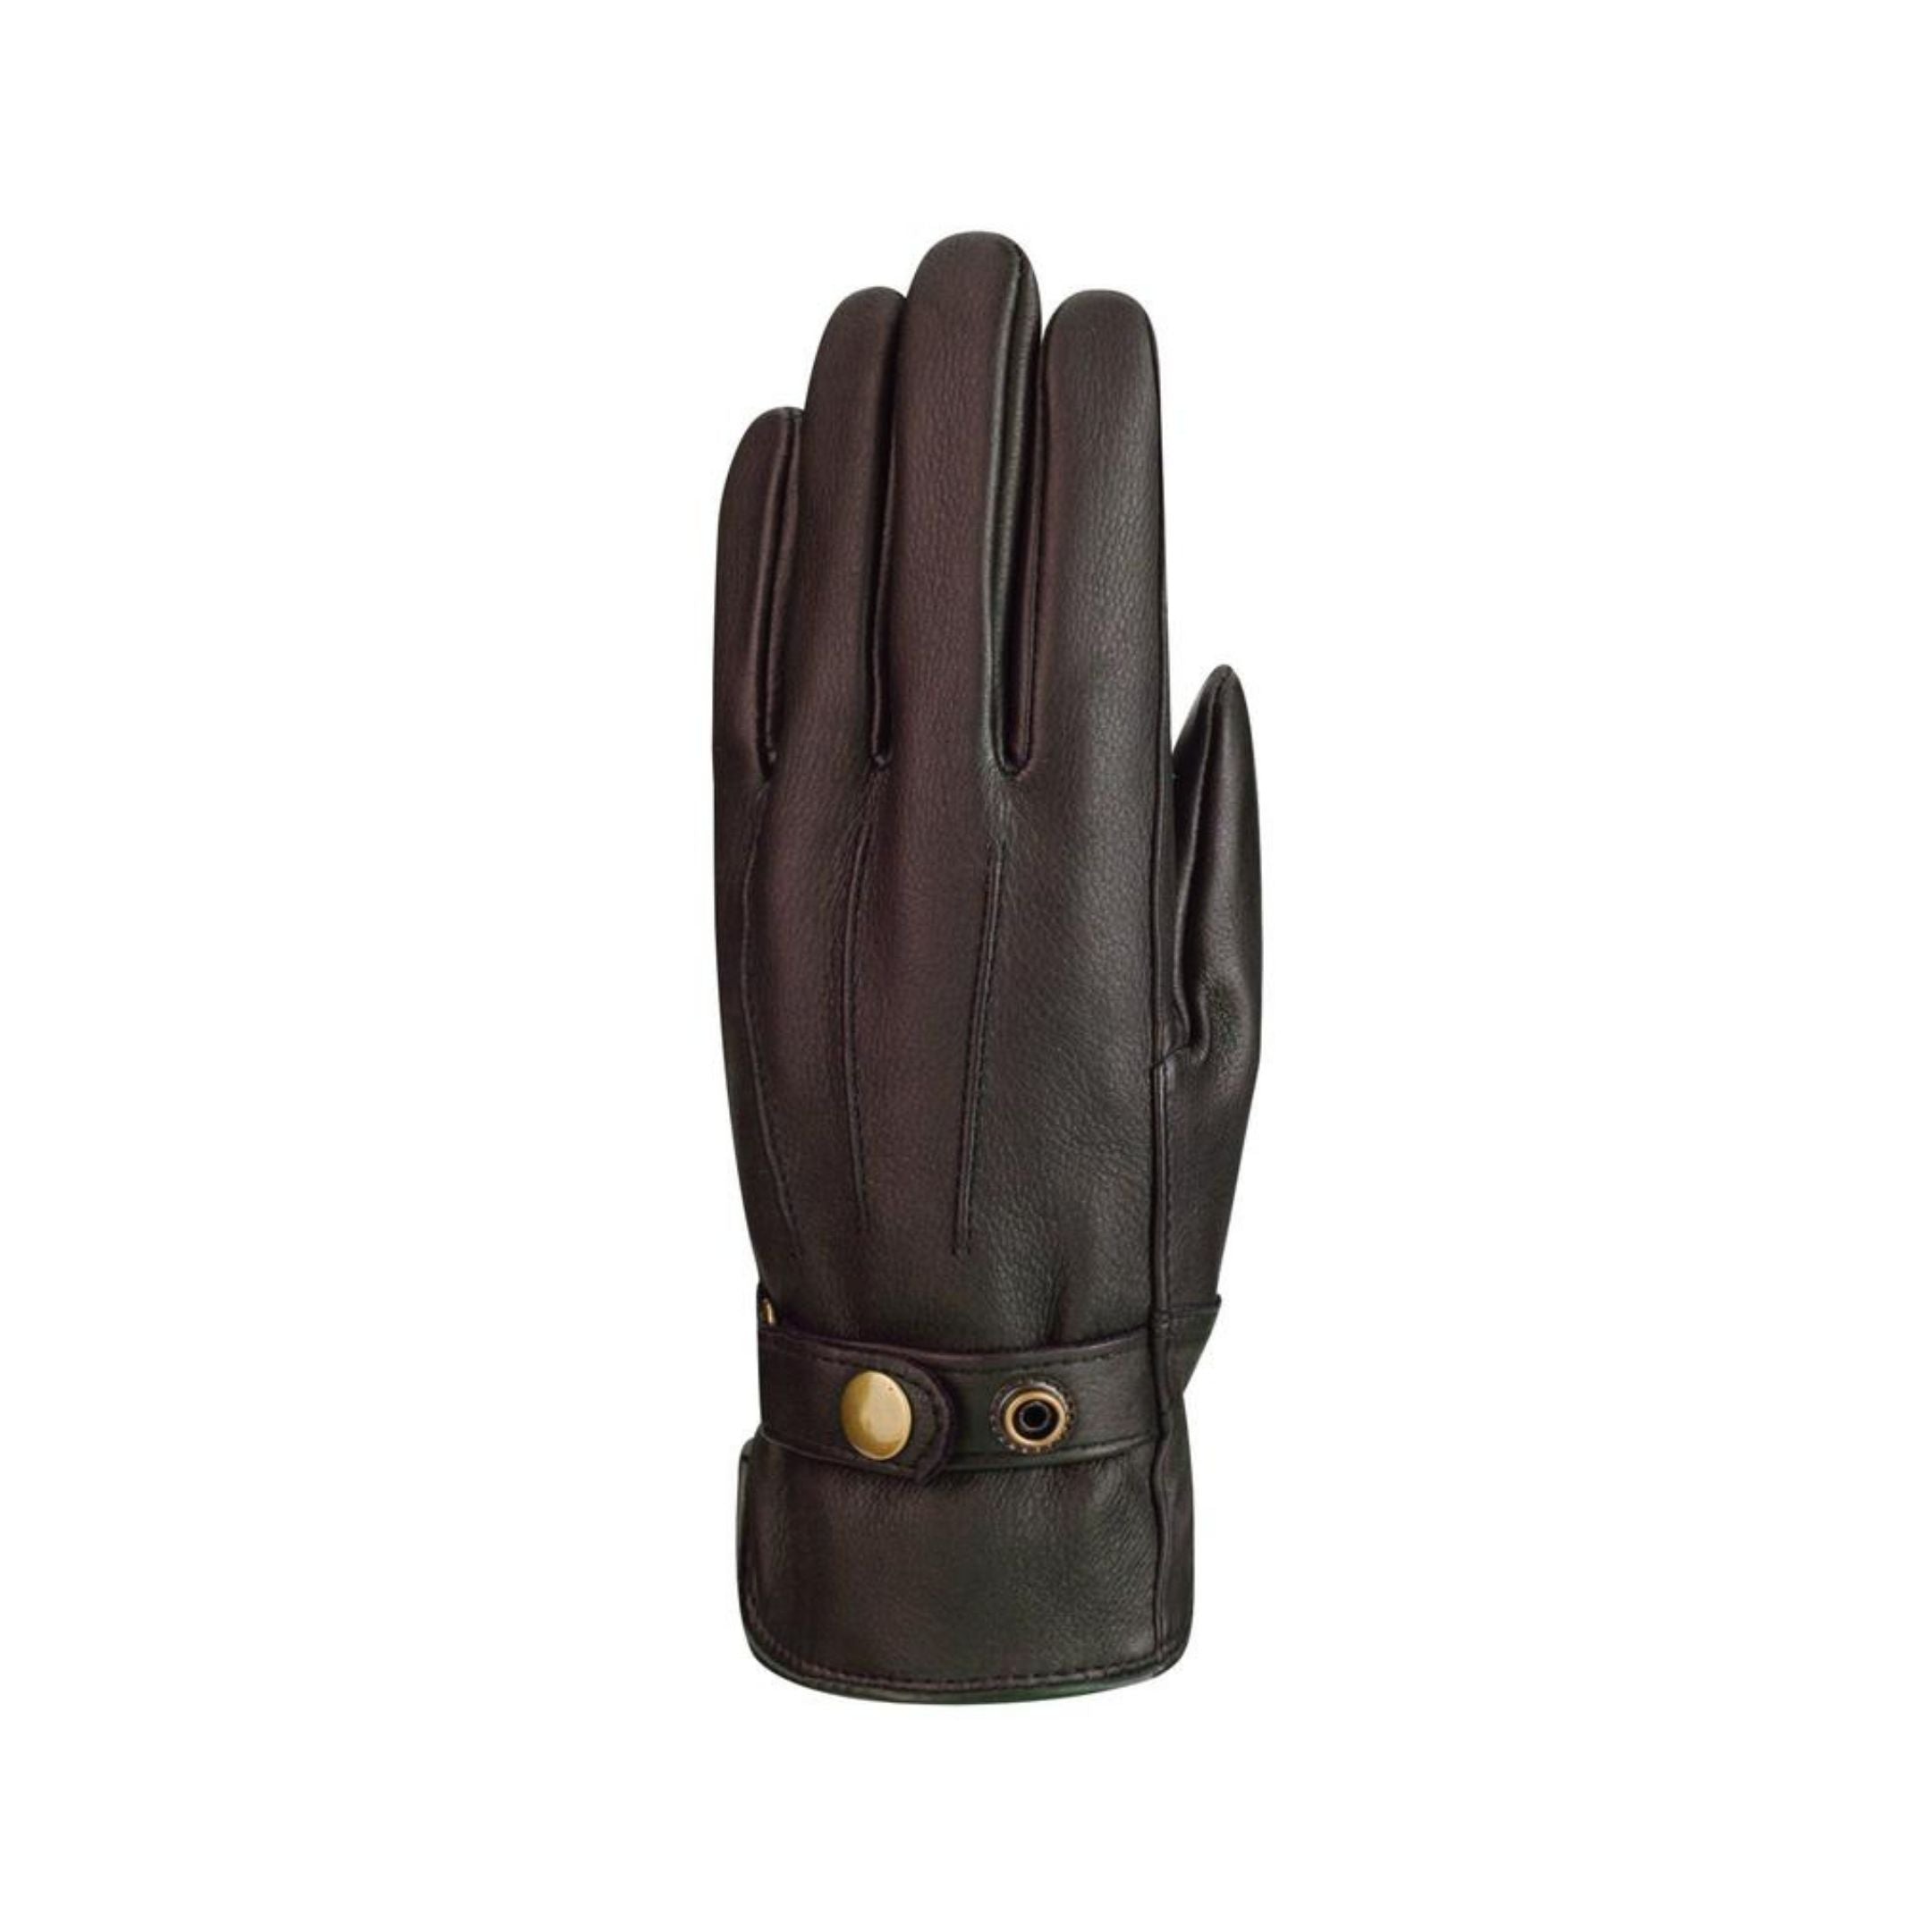 Top view of brown leather gloves with detail lines and an adjustable cuff, fitted with gold button closure.